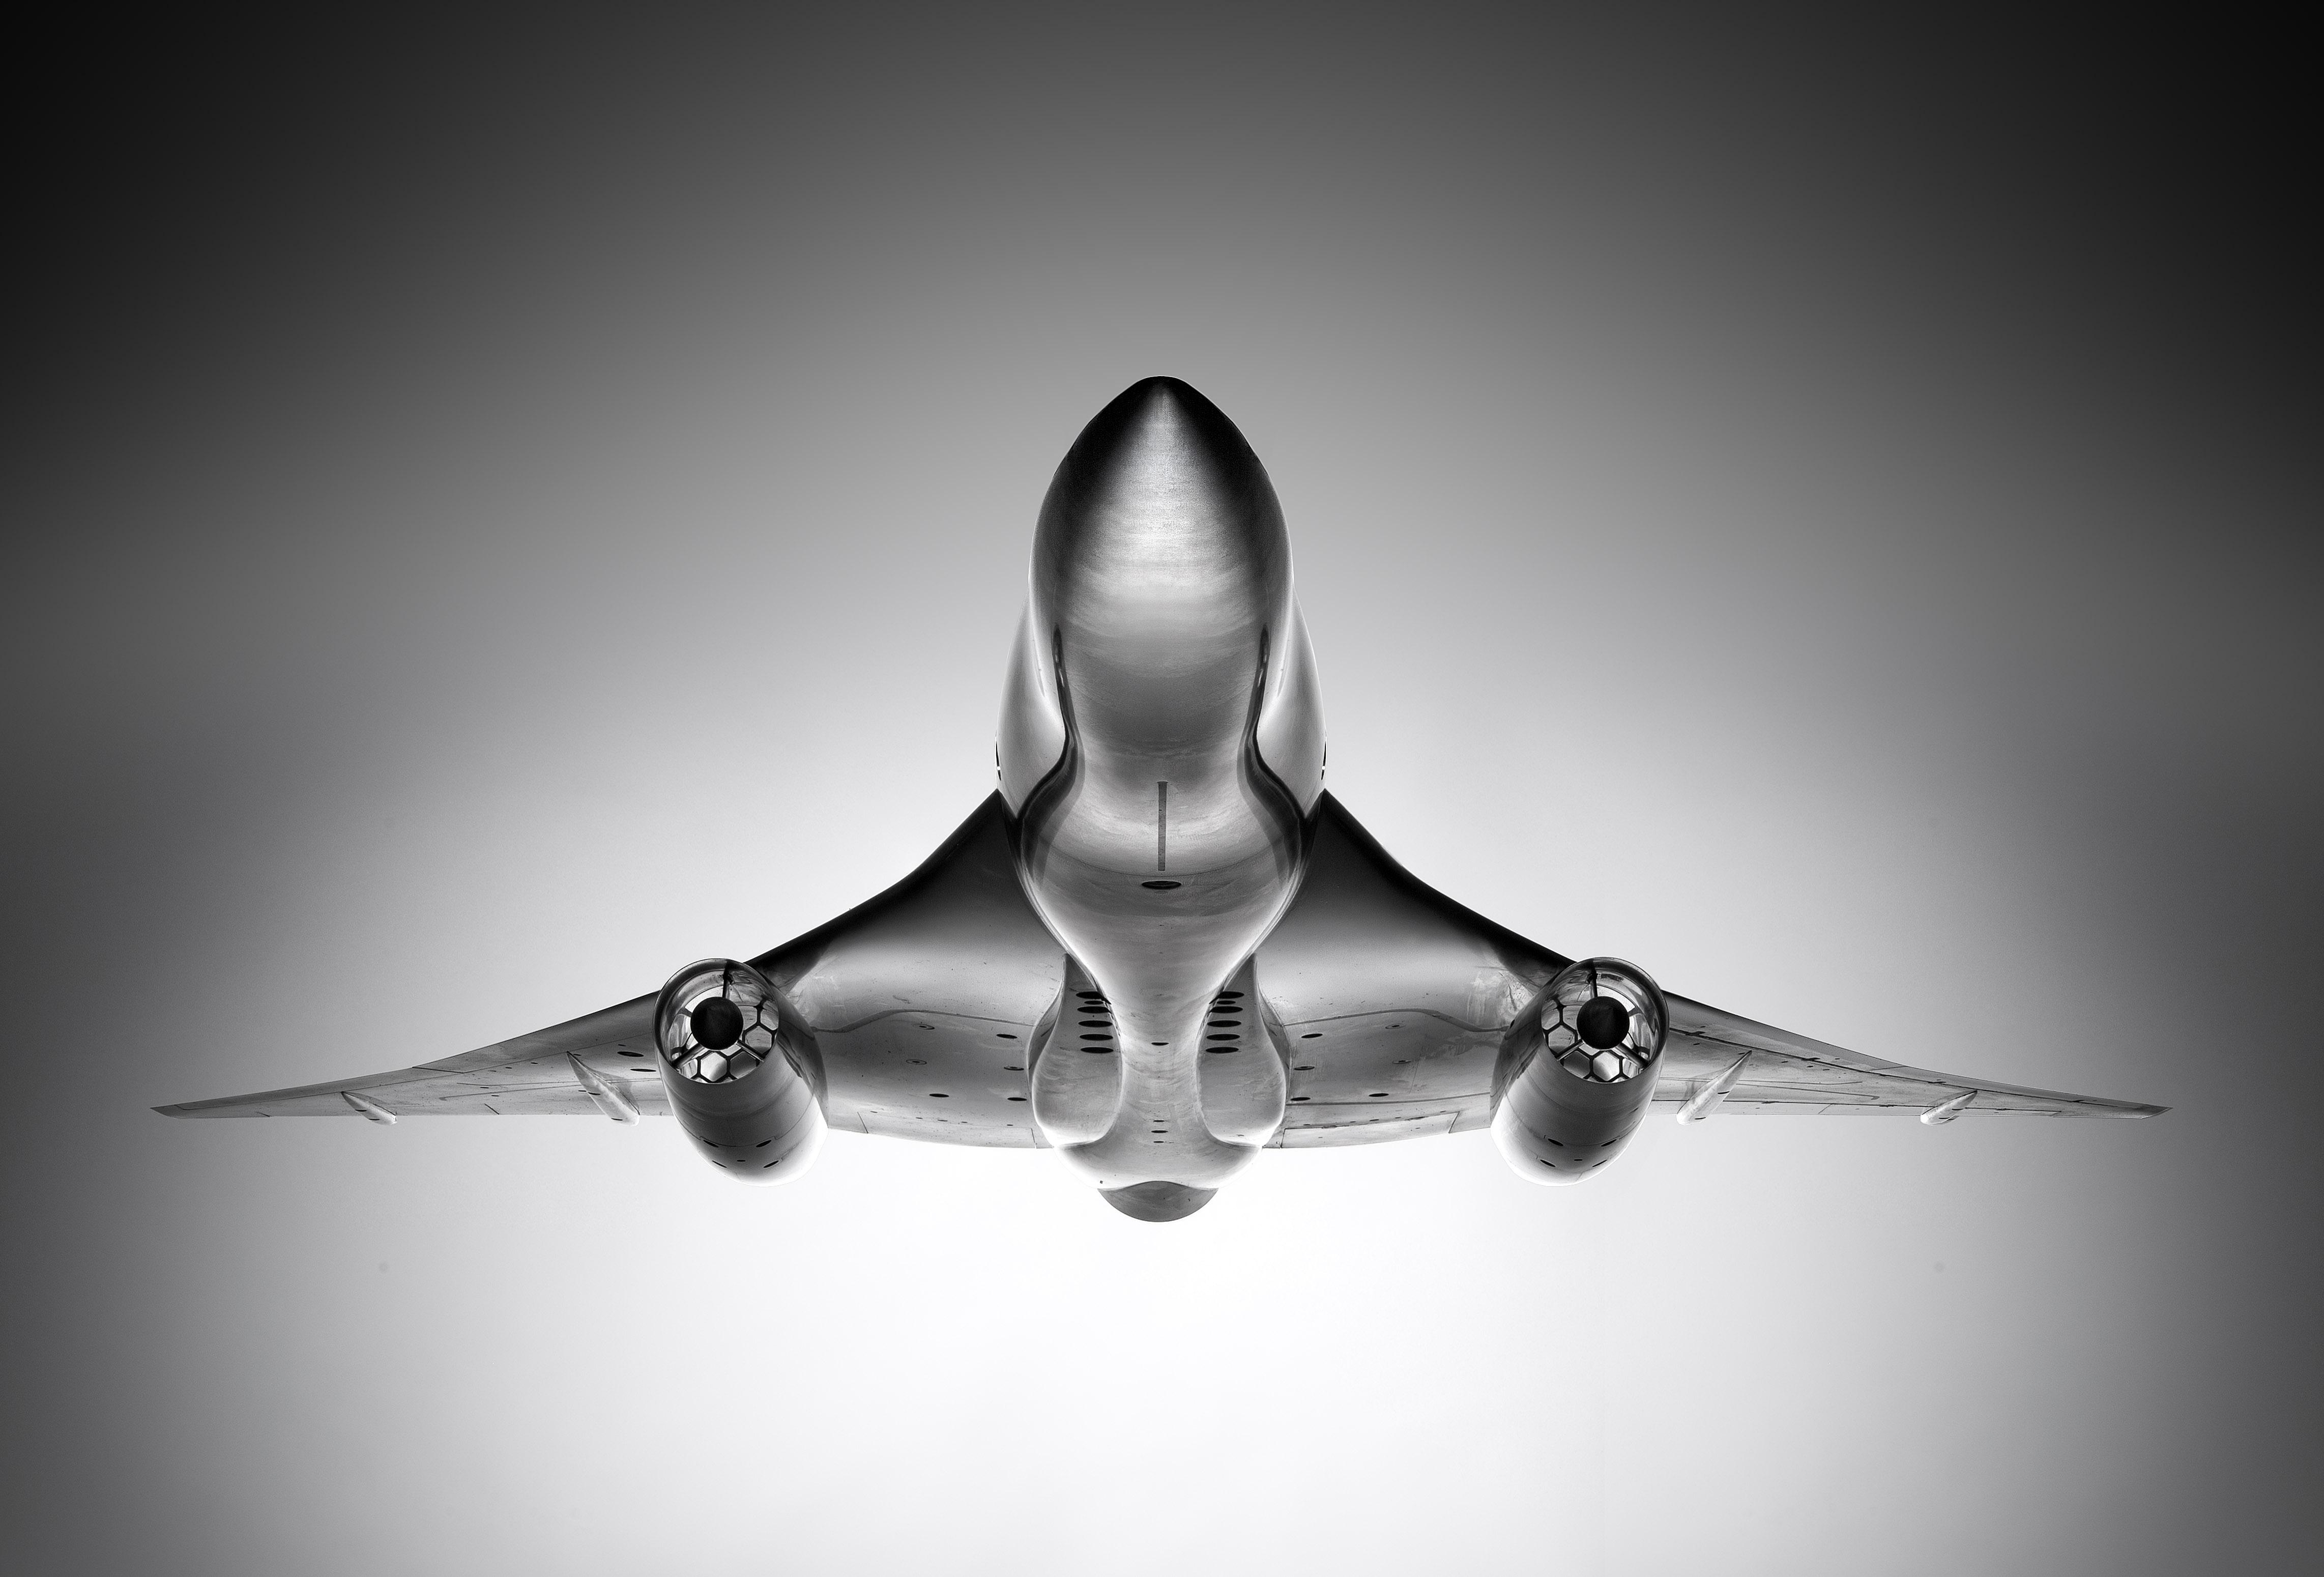 Refined Aerion Supersonic Design Set For Wind Tunnel Tests